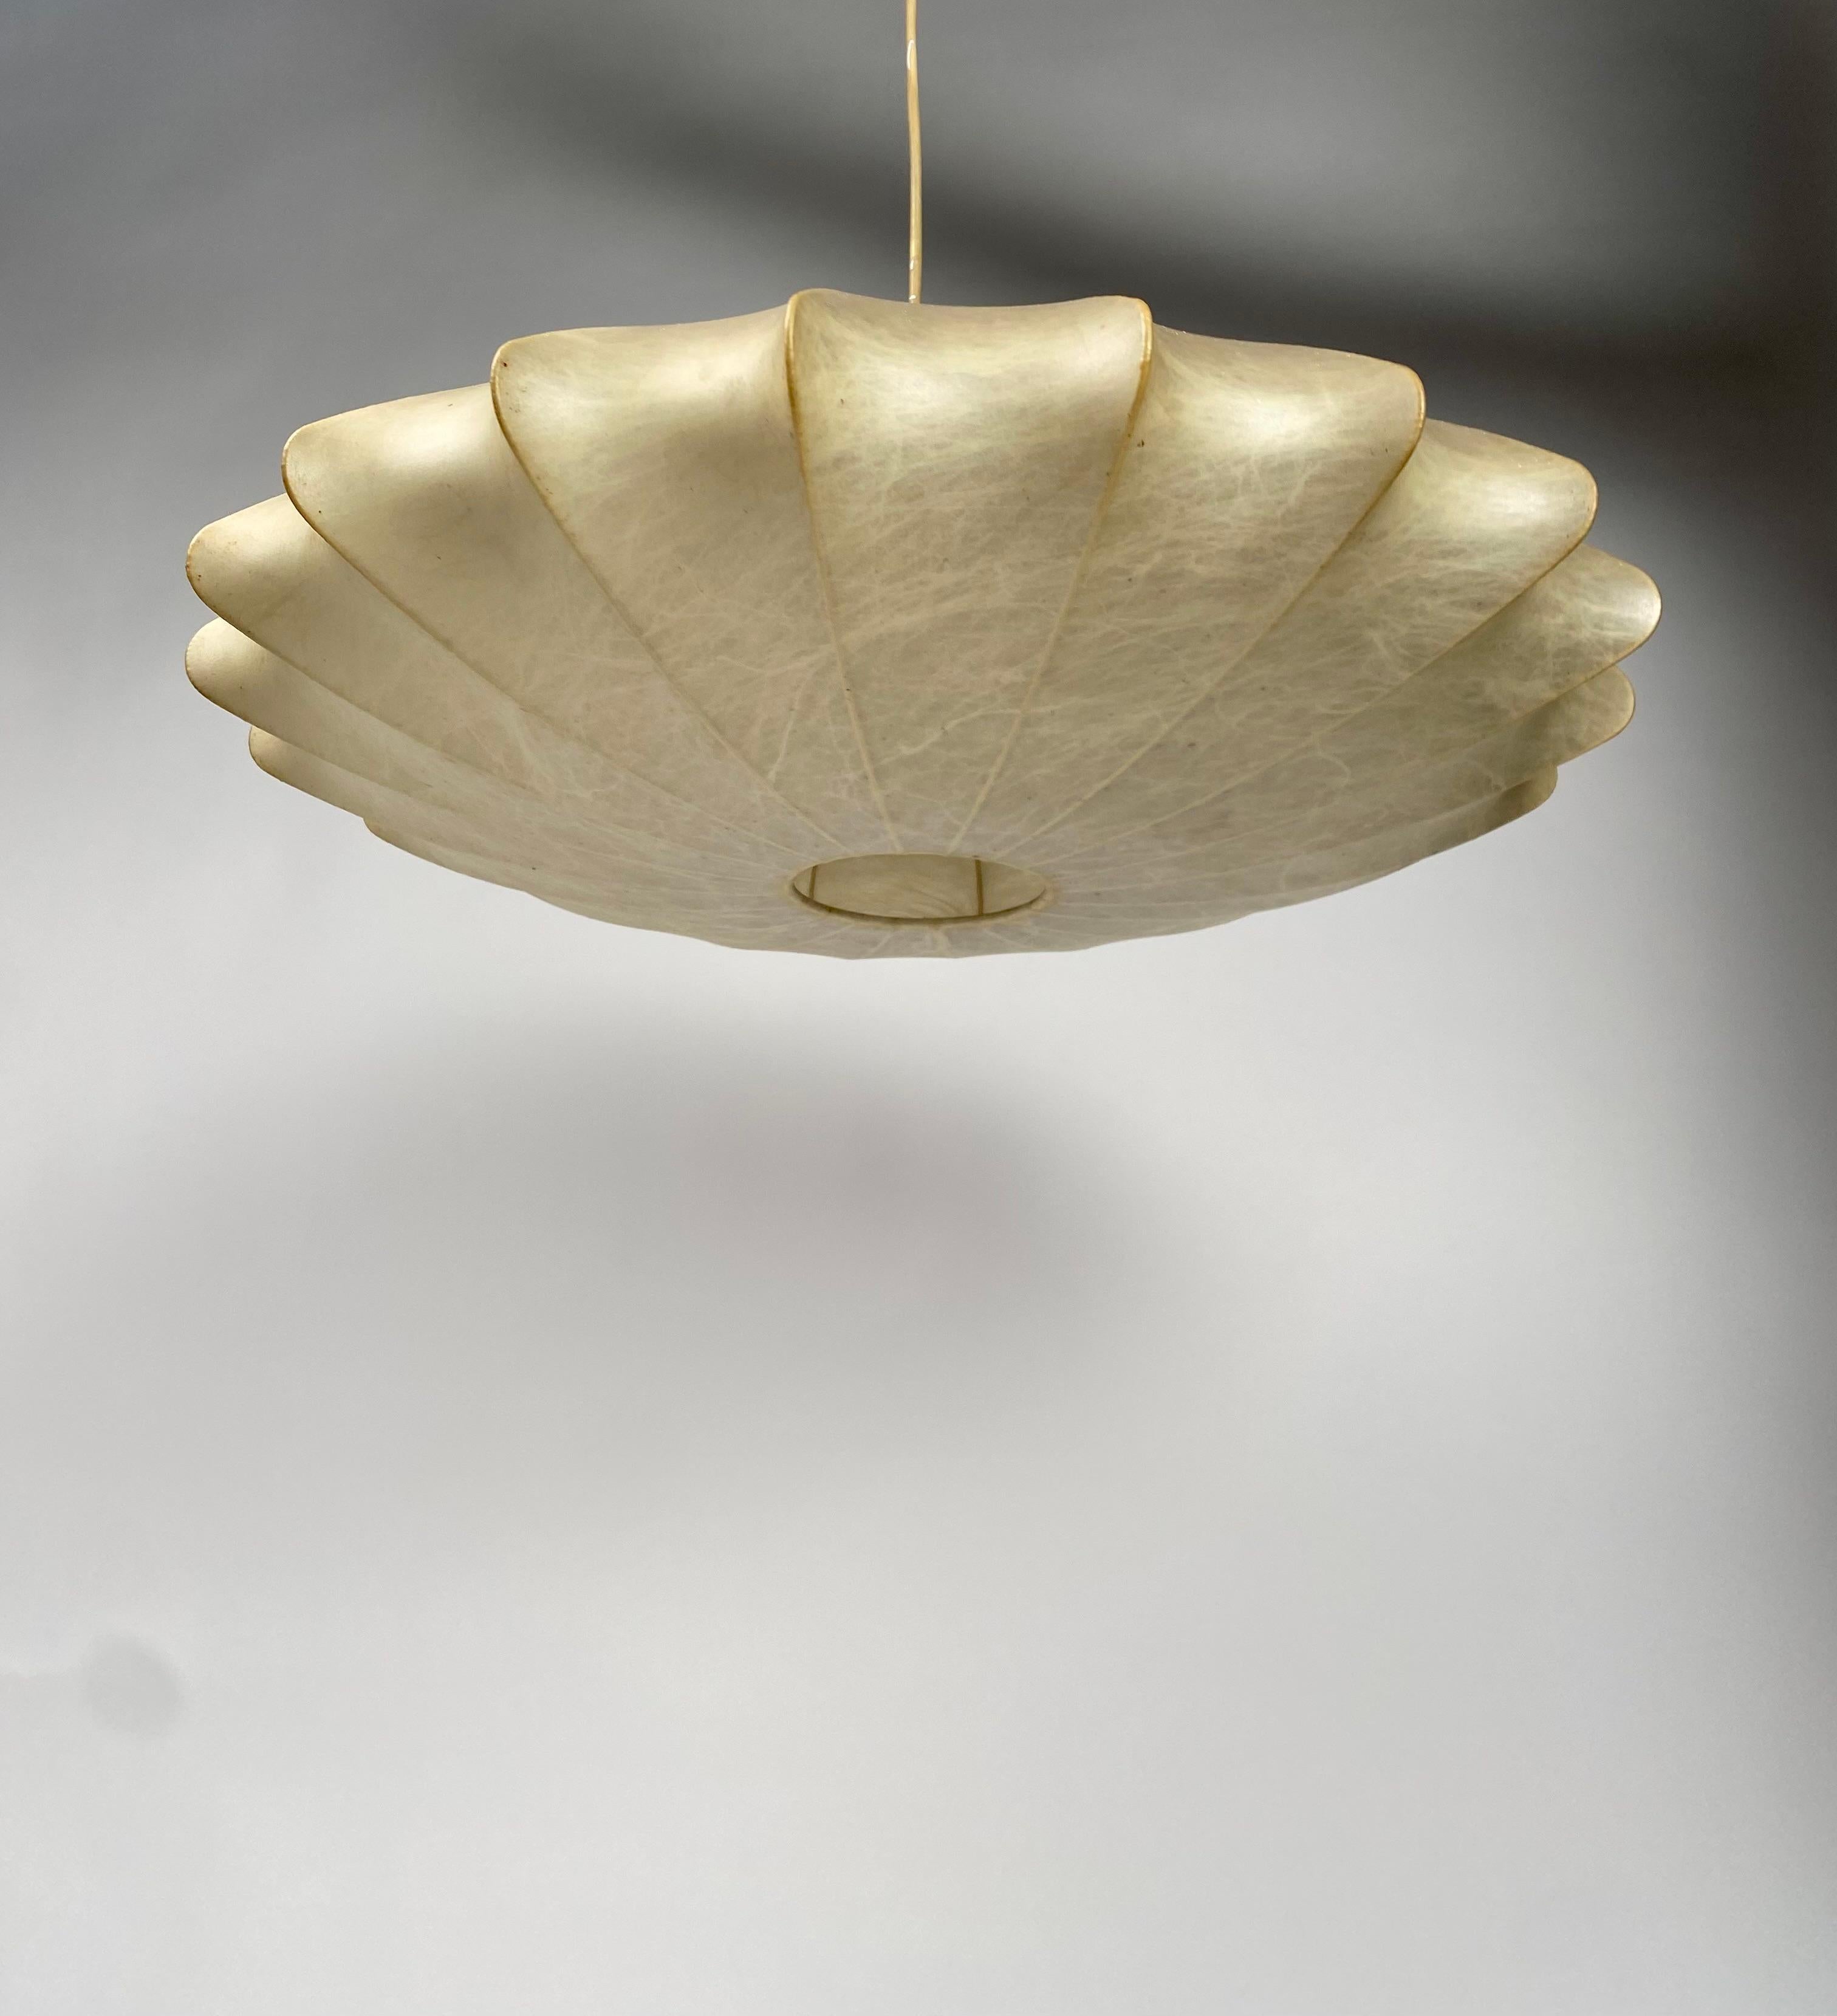 Mid-Century chandelier in Cocoon, Italian production, in the style of Achille and Piergiacomo Castiglioni.

It is a very original suspension lamp in shape, which well represents the imagination and refinement of 1960s Italian design. Very suitable